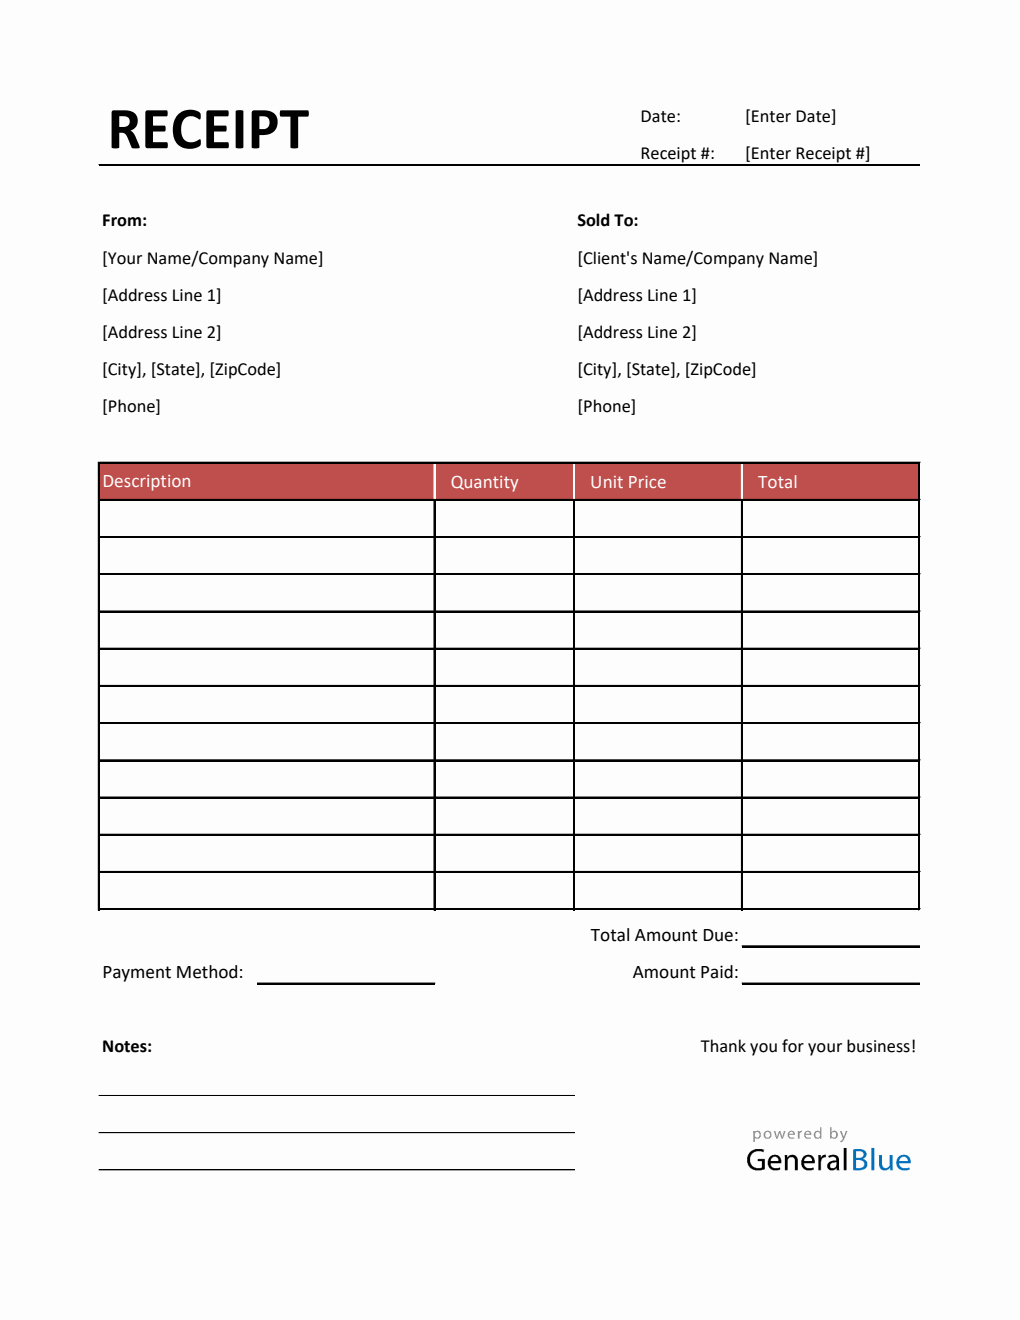 Simple Receipt Template in Excel (Red)